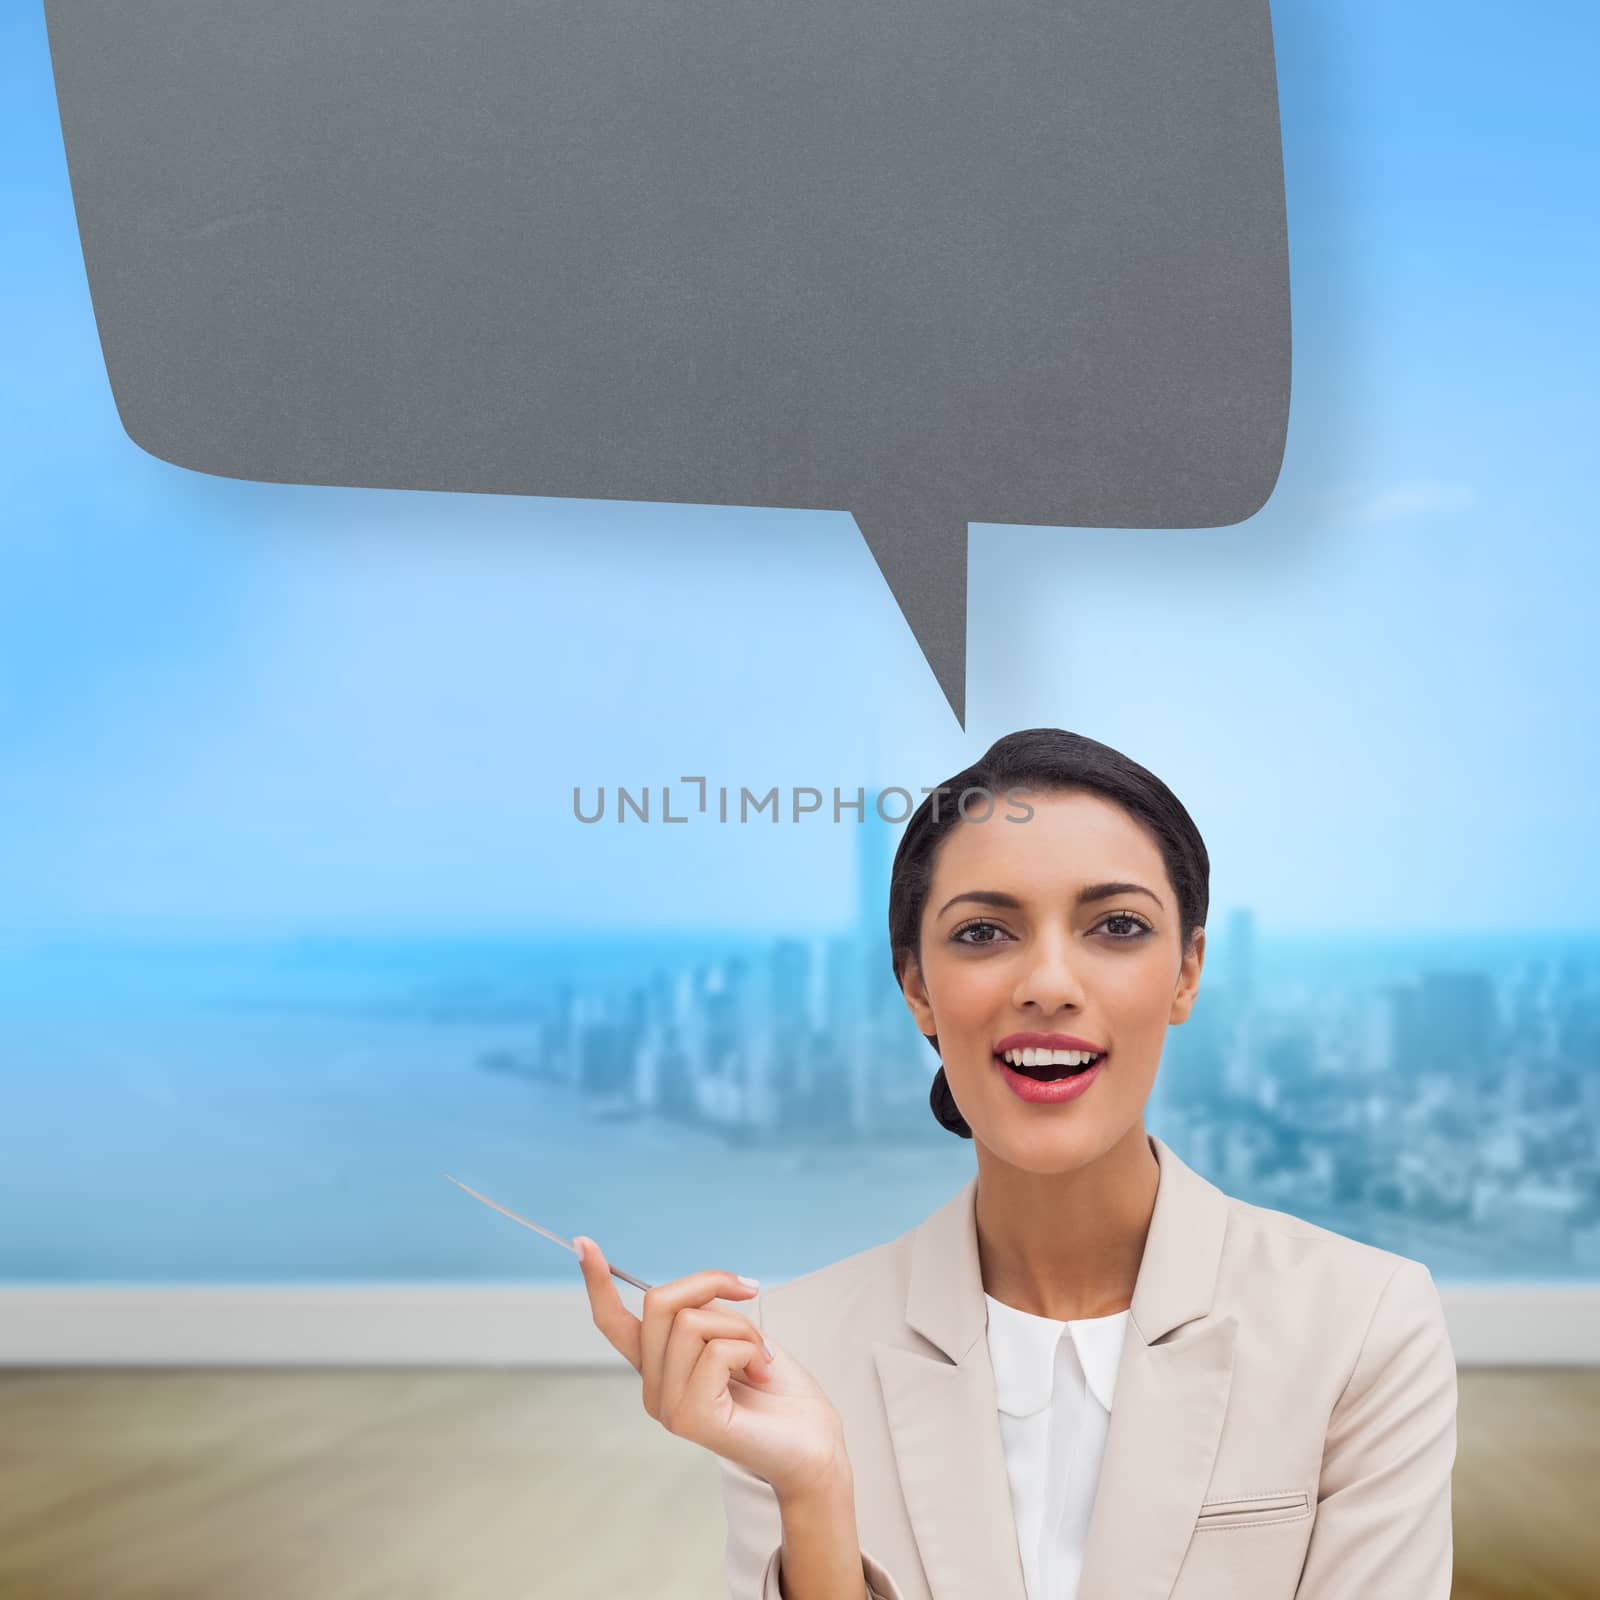 Smiling businesswoman holding a pen with speech bubble against city projection on wall